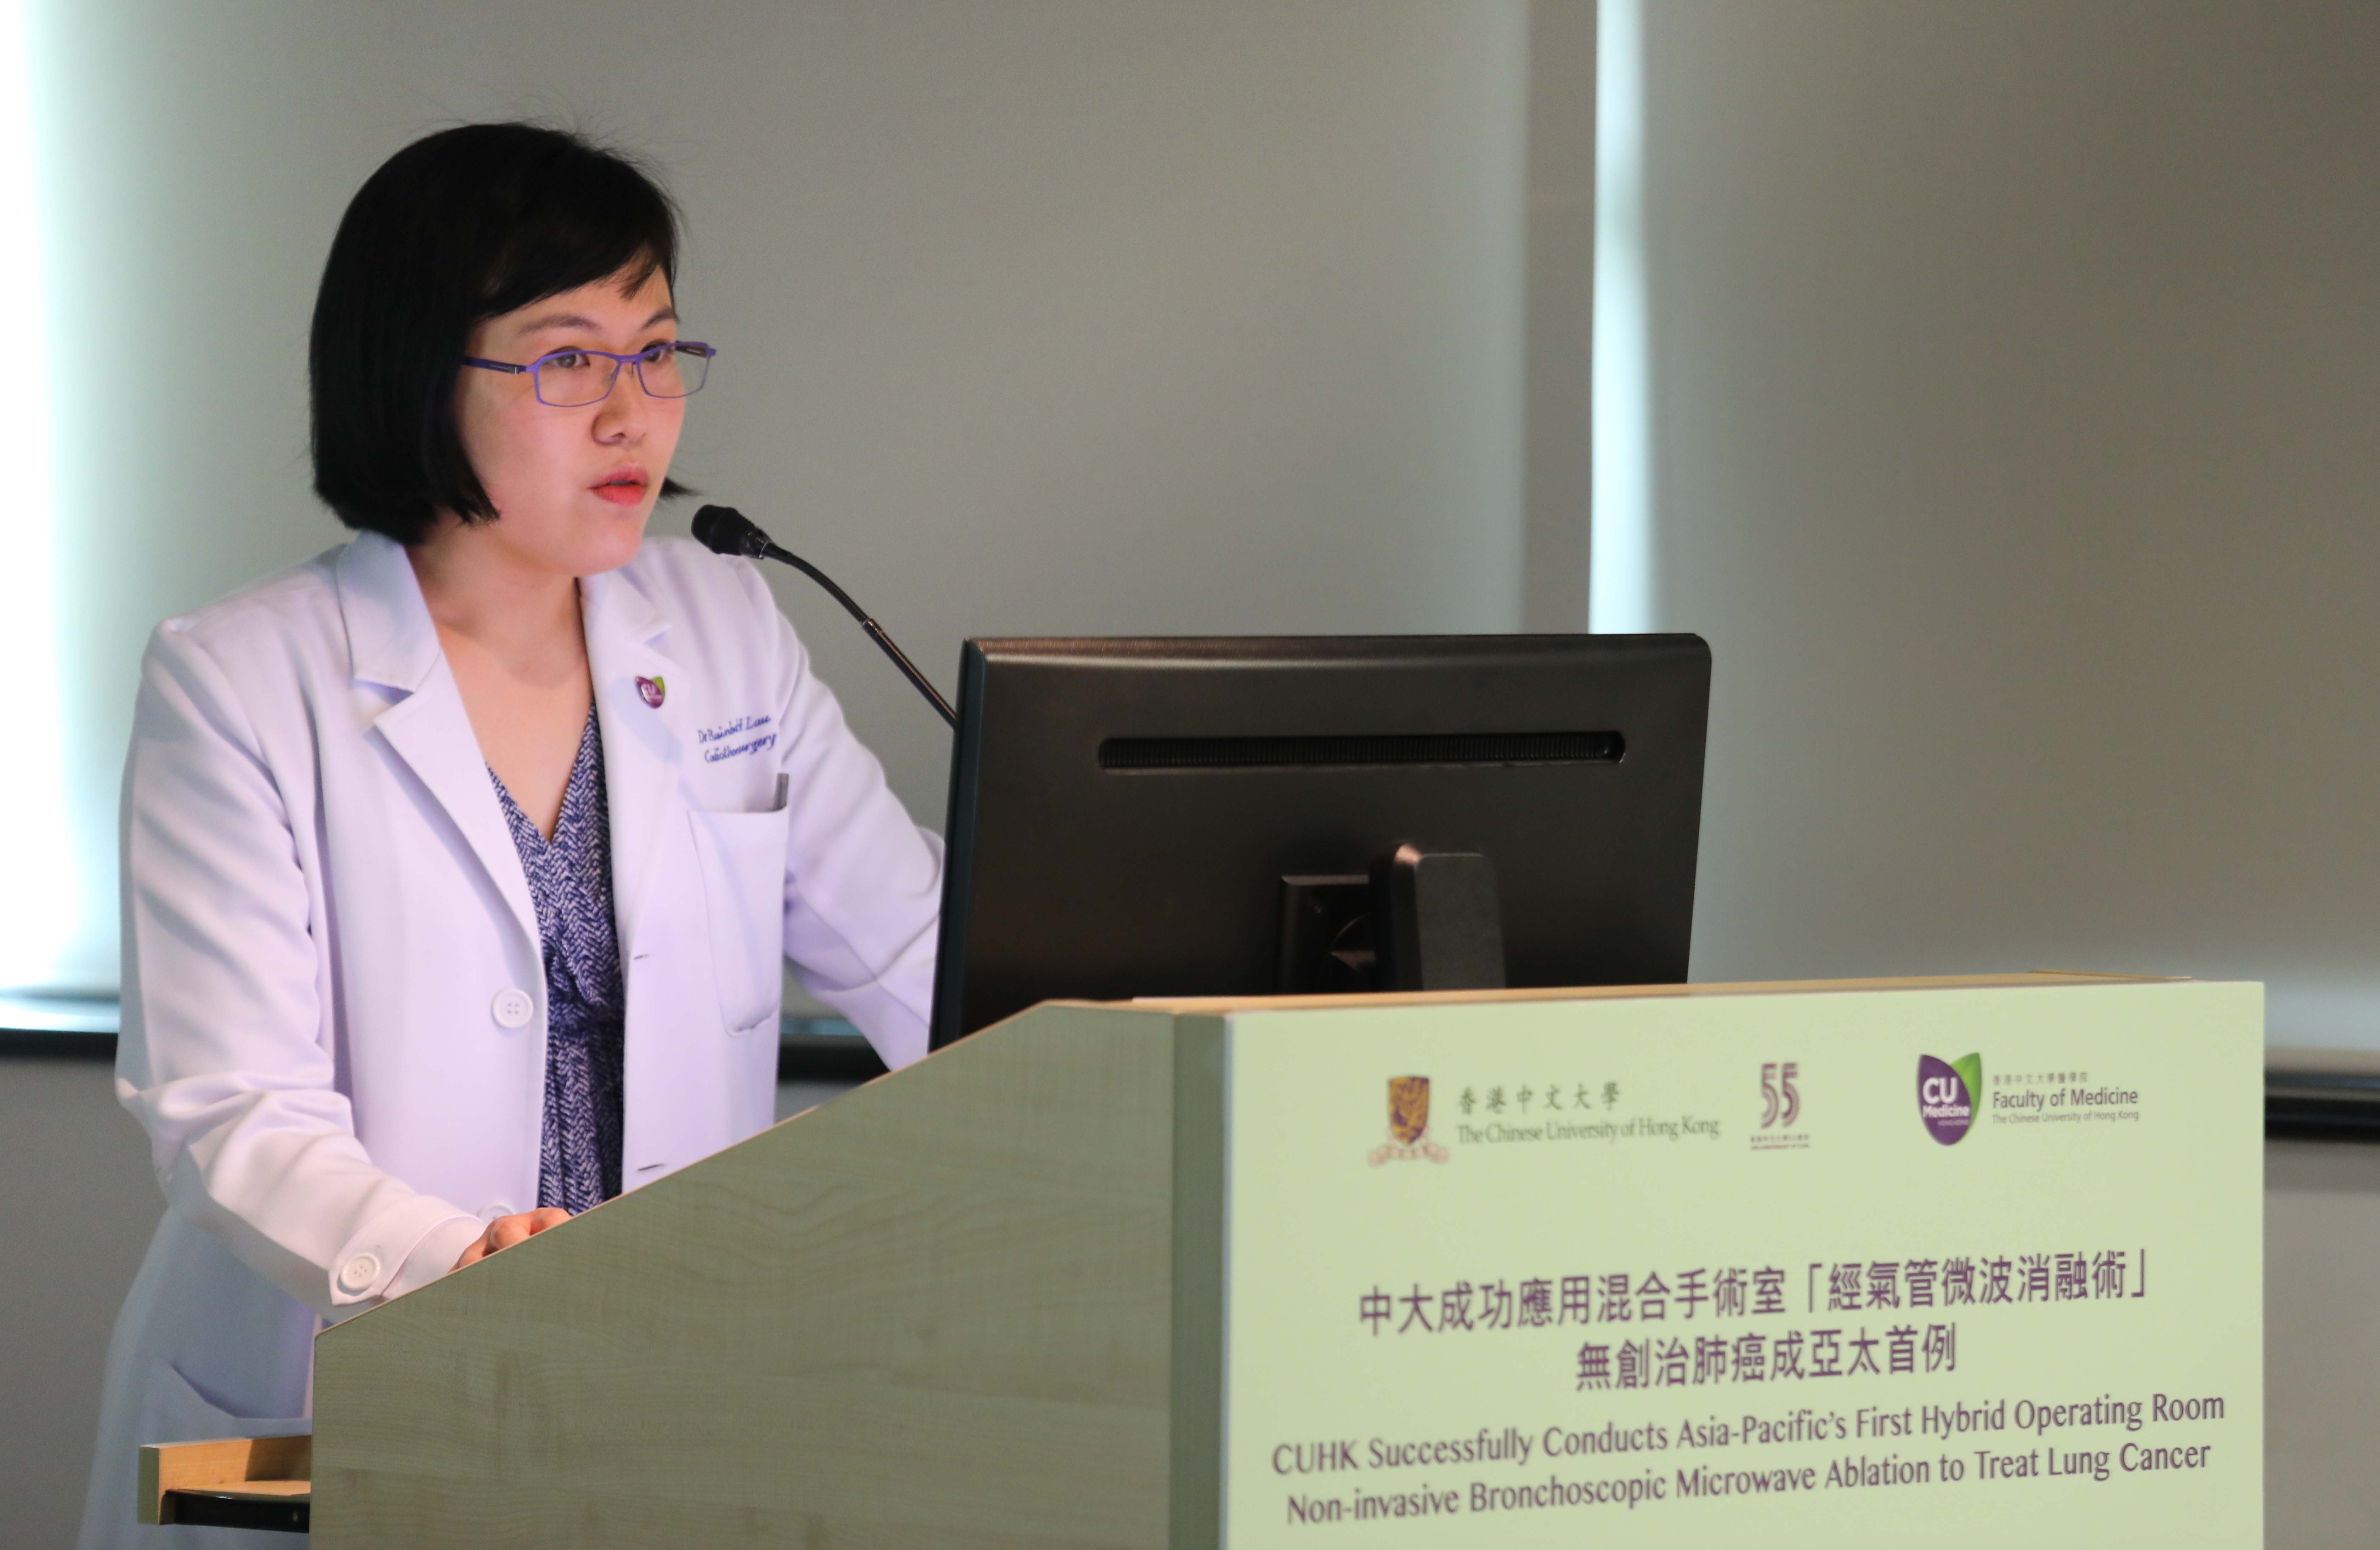 Dr. Rainbow LAU explains that microwave energy emitted from the catheter tip excites water molecules within the treatment zone of the lung tissue, raising the surrounding temperature to above 60°C and effectively destroying the cancer.